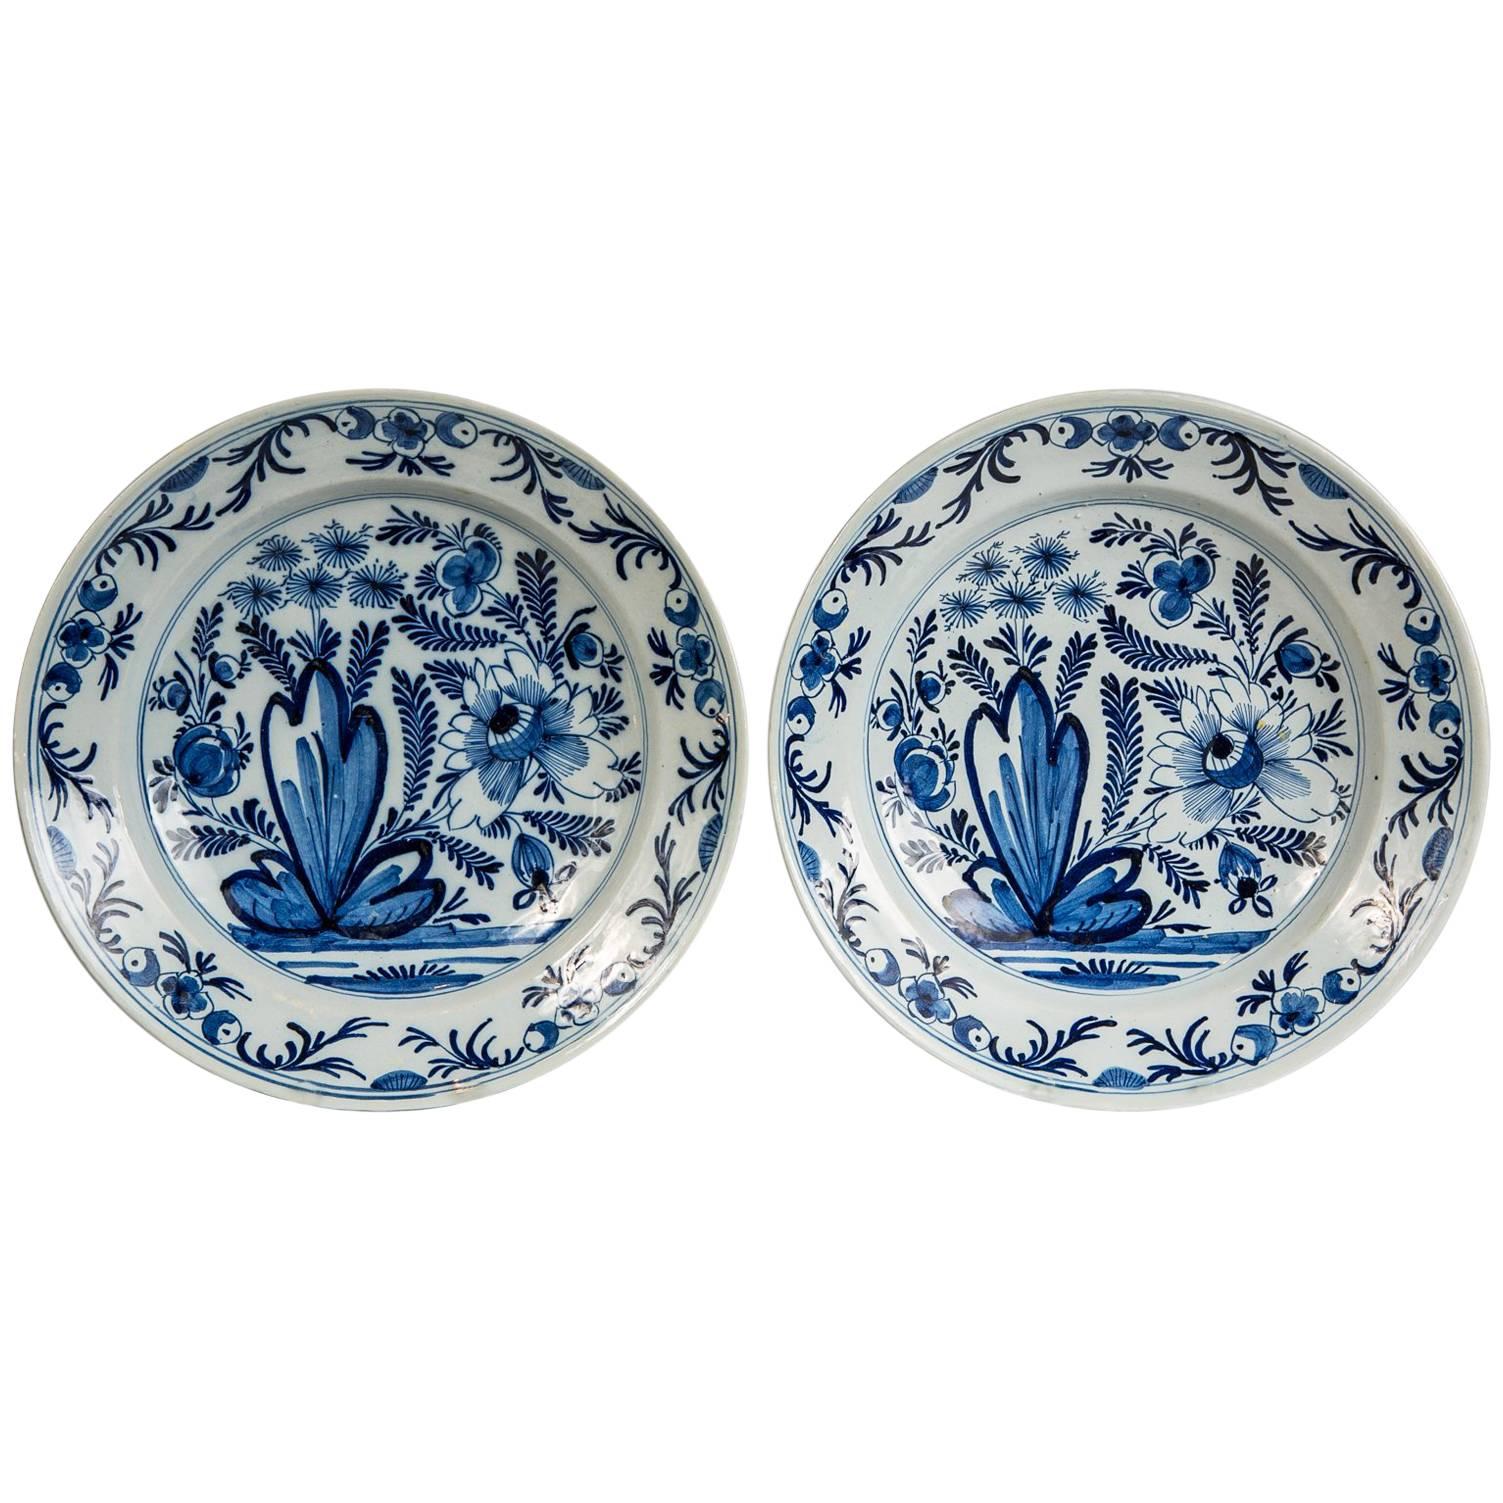 Pair of Blue and White Delft Chargers Made in Netherlands circa 1800